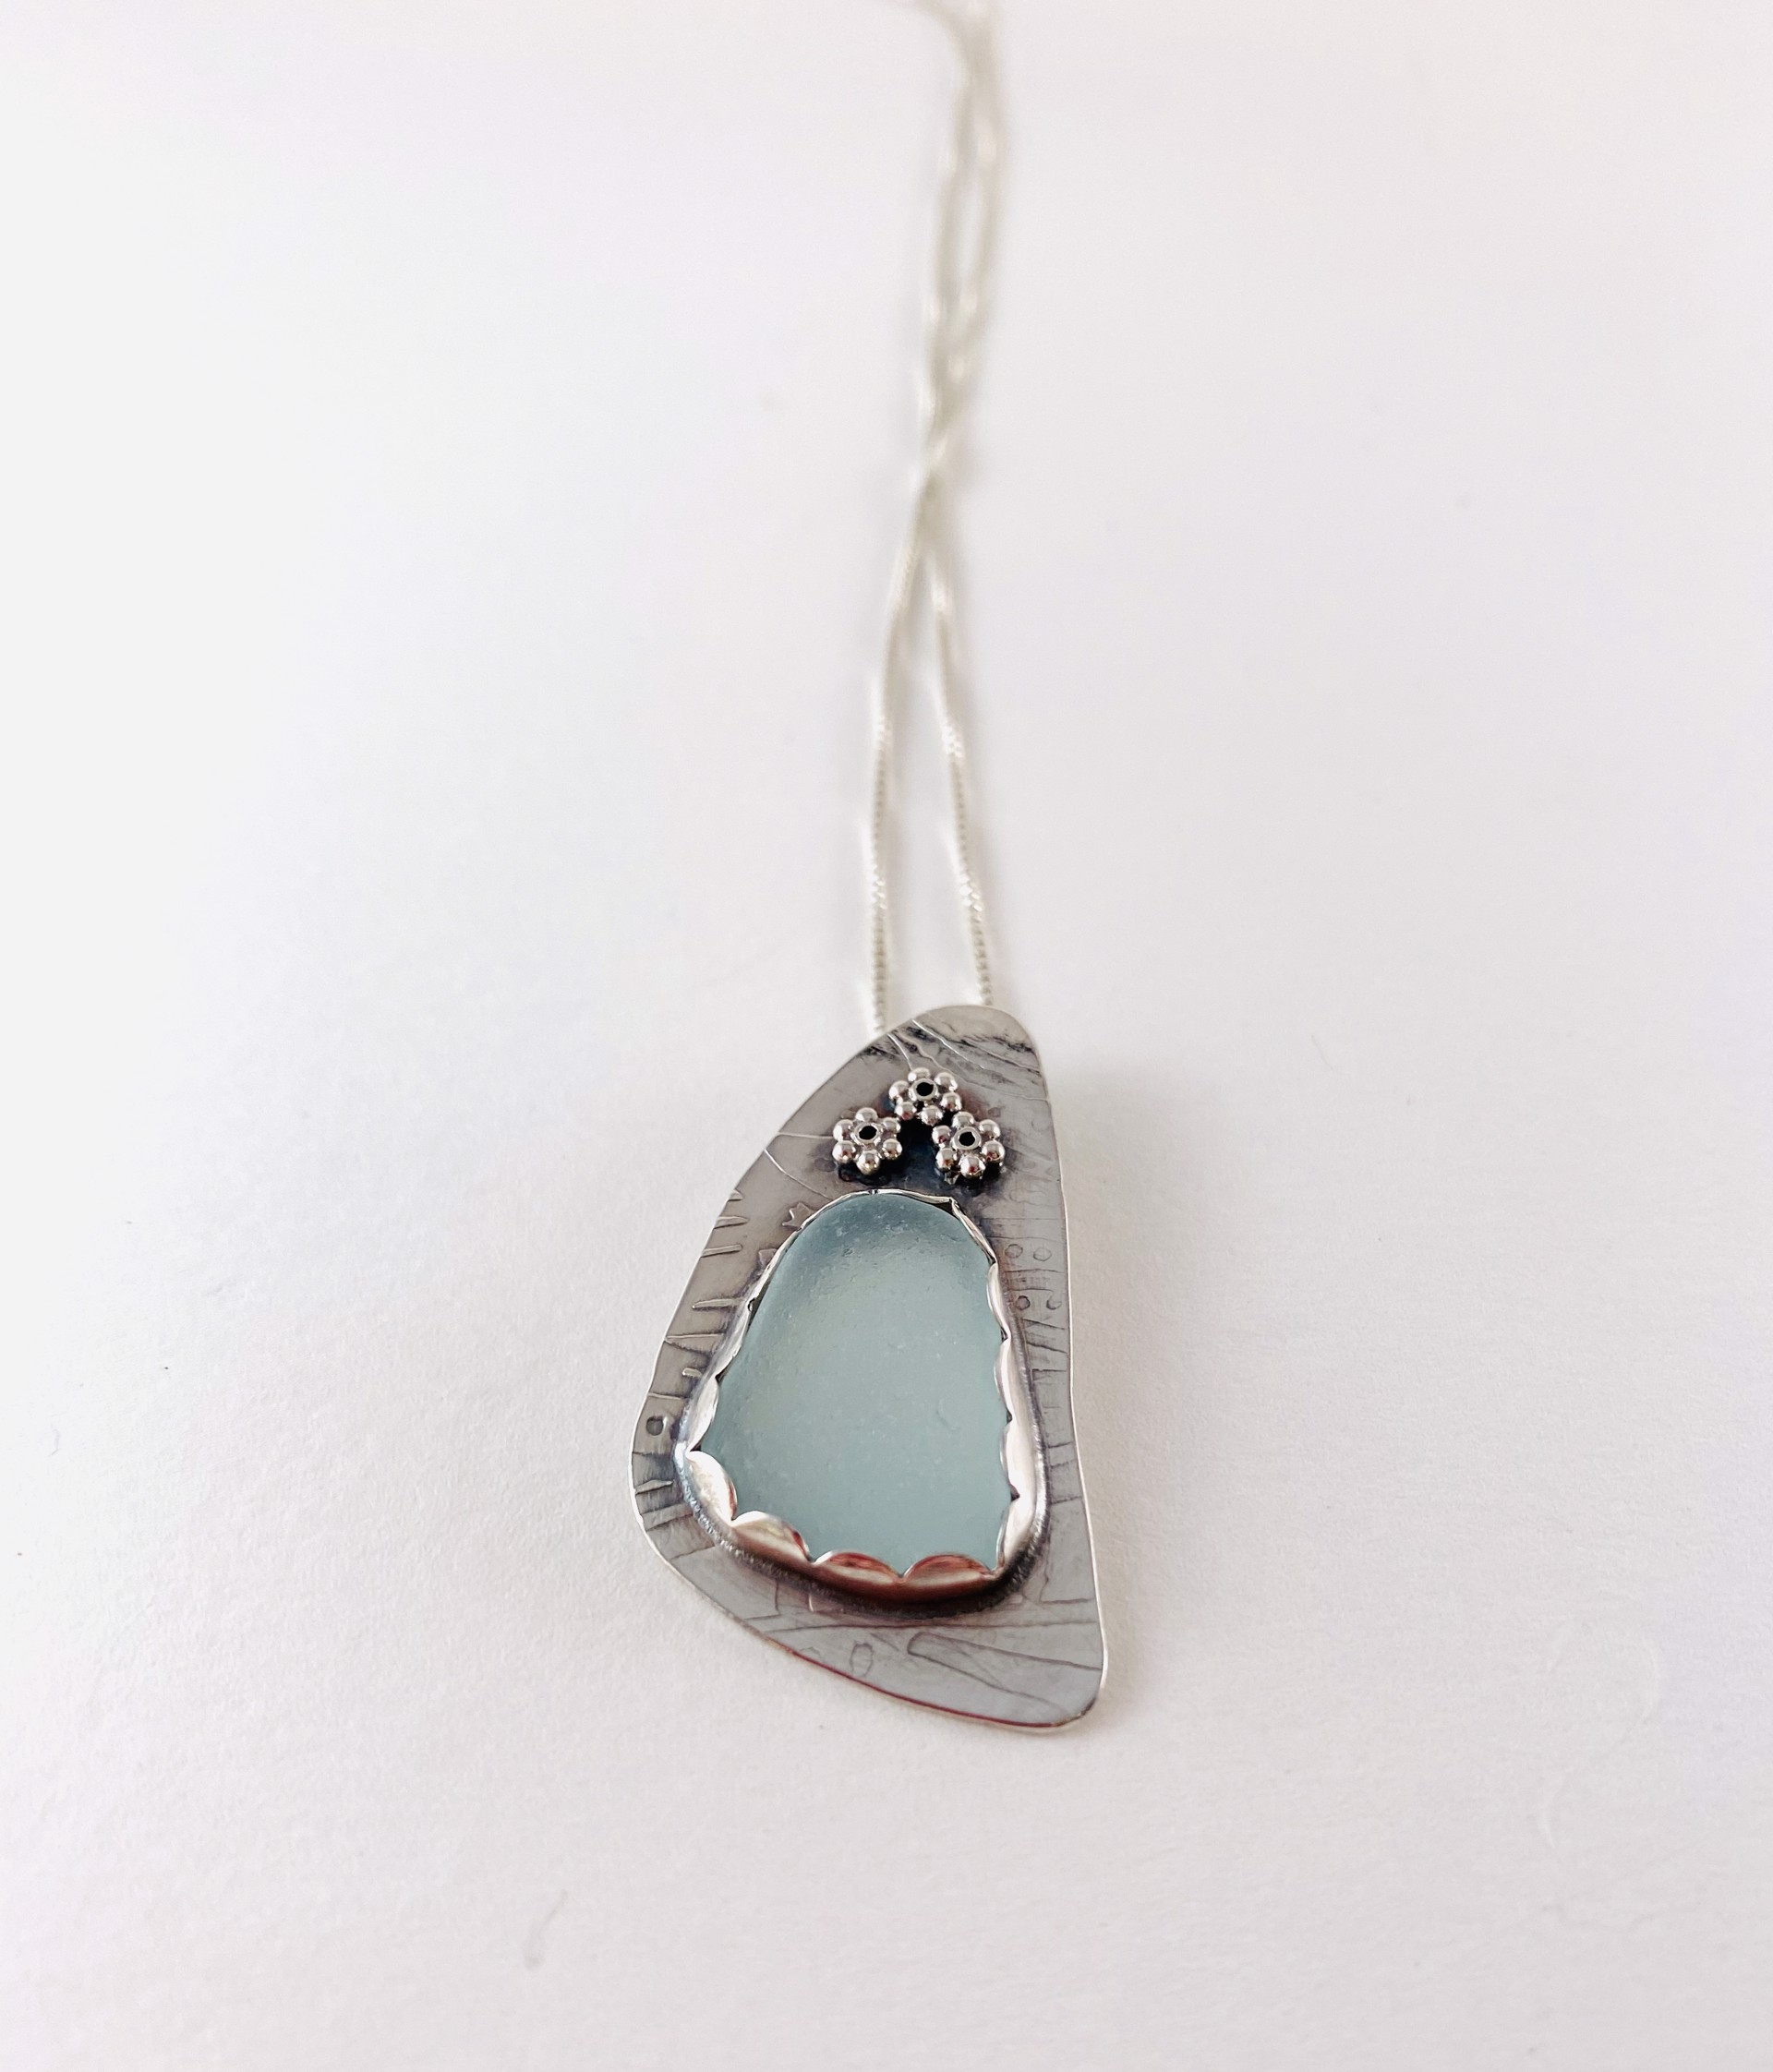 Silver and Sea glass Pendant on Silver Box Chain by Anne Bivens